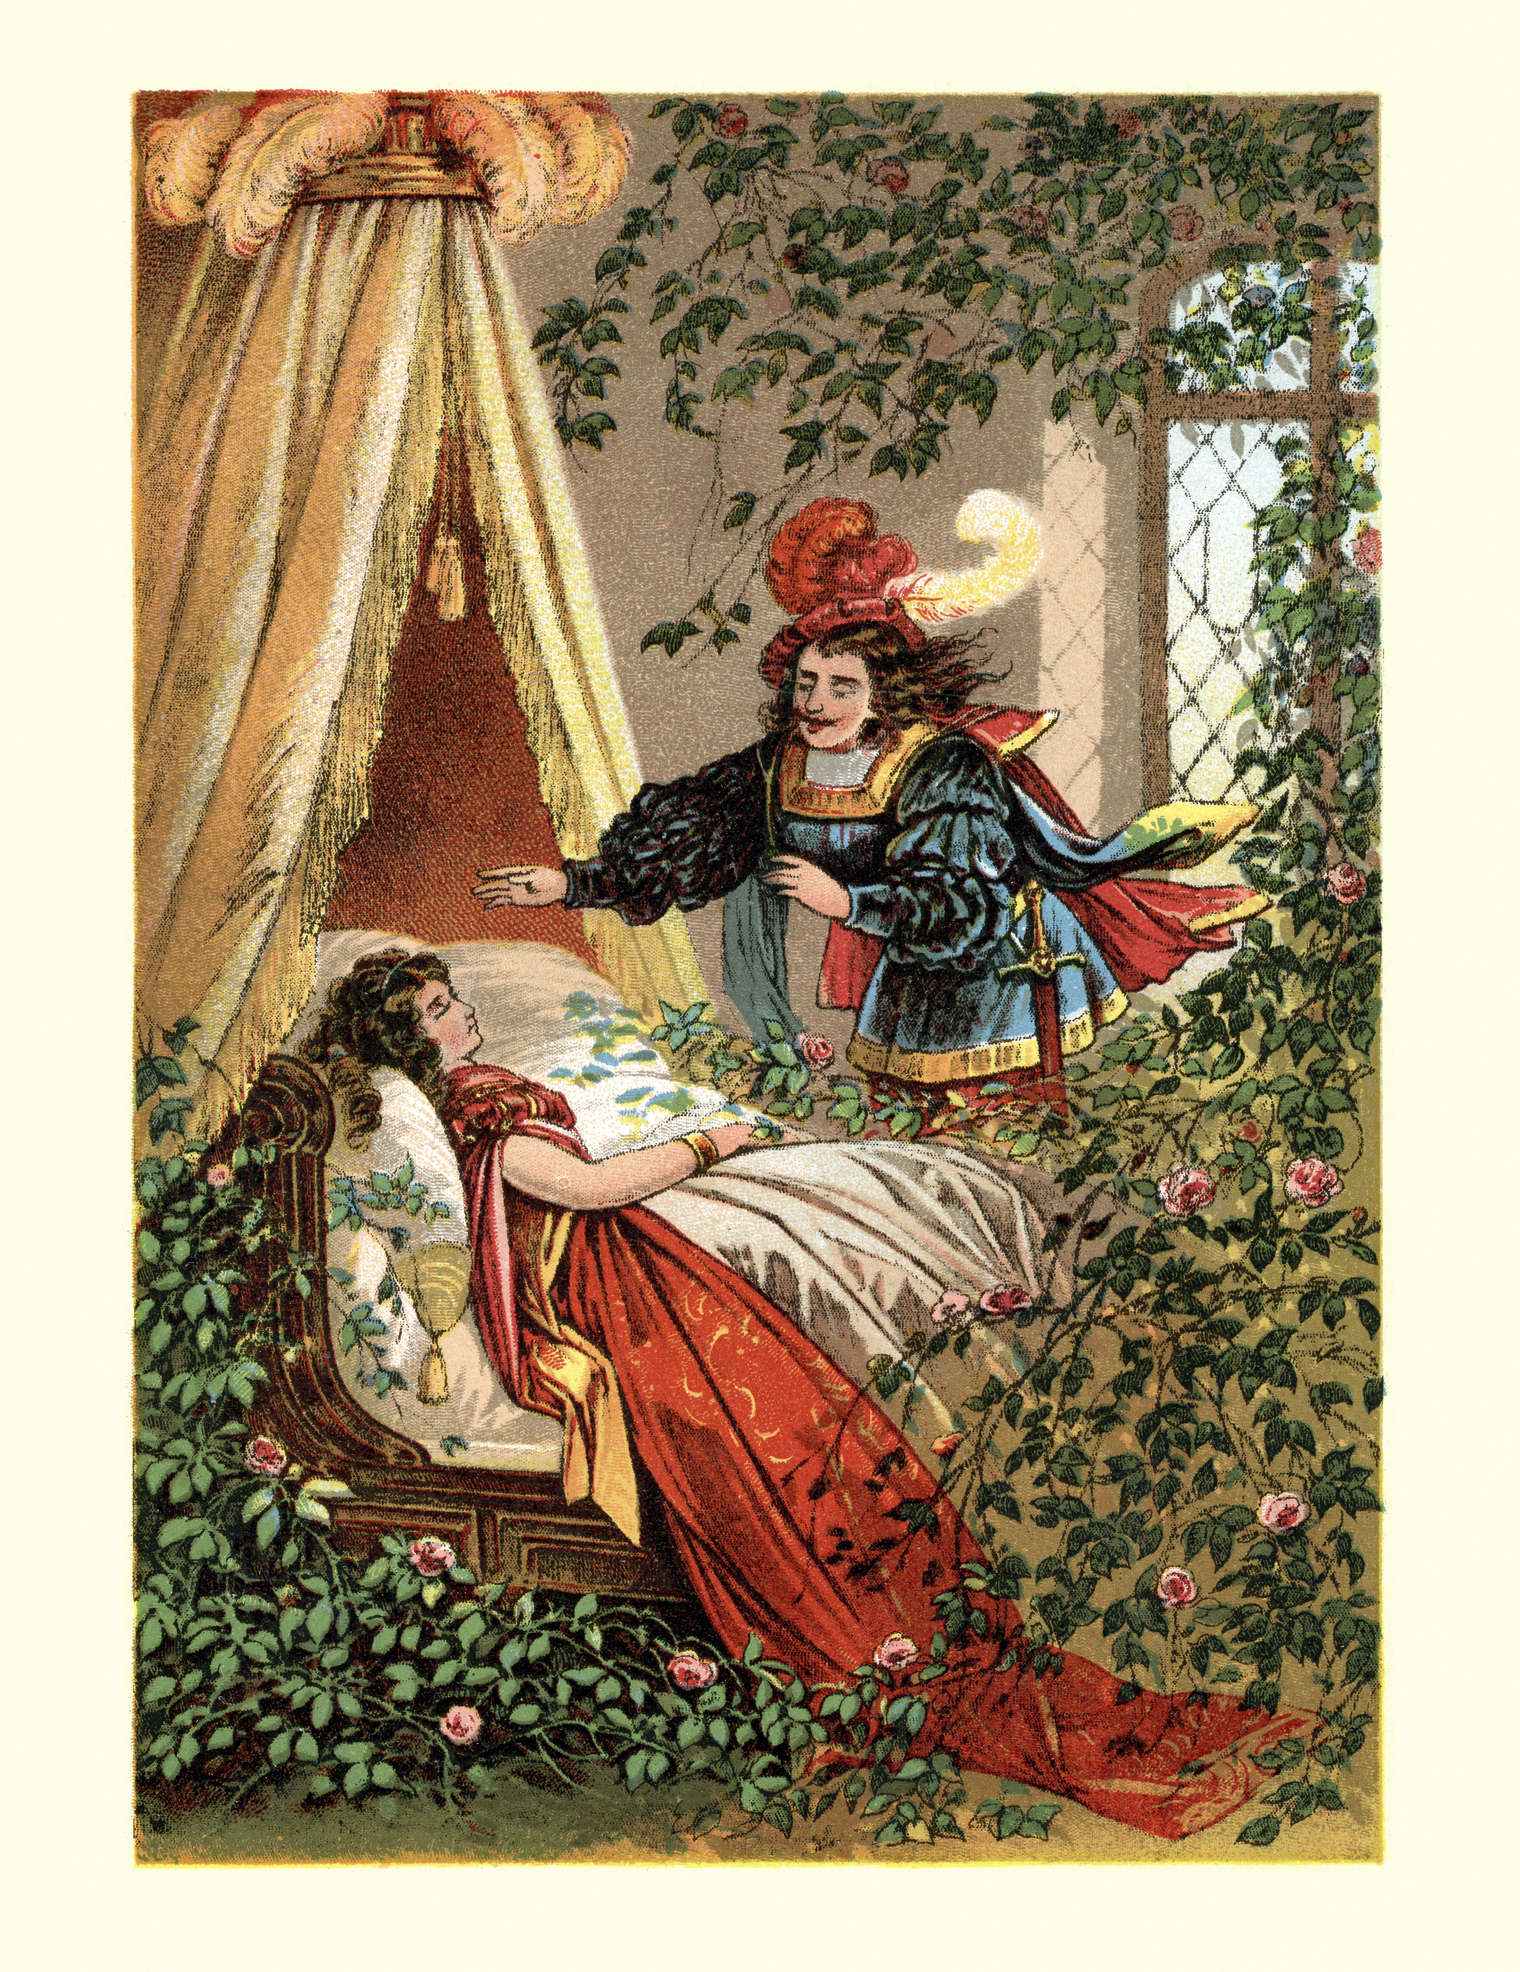 Vintage colour engraving of Sleeping Beauty (German: DornrÃ¶schen) by the Brothers Grimm is a classic fairy tale involving a beautiful princess, a sleeping enchantment, and a handsome prince.